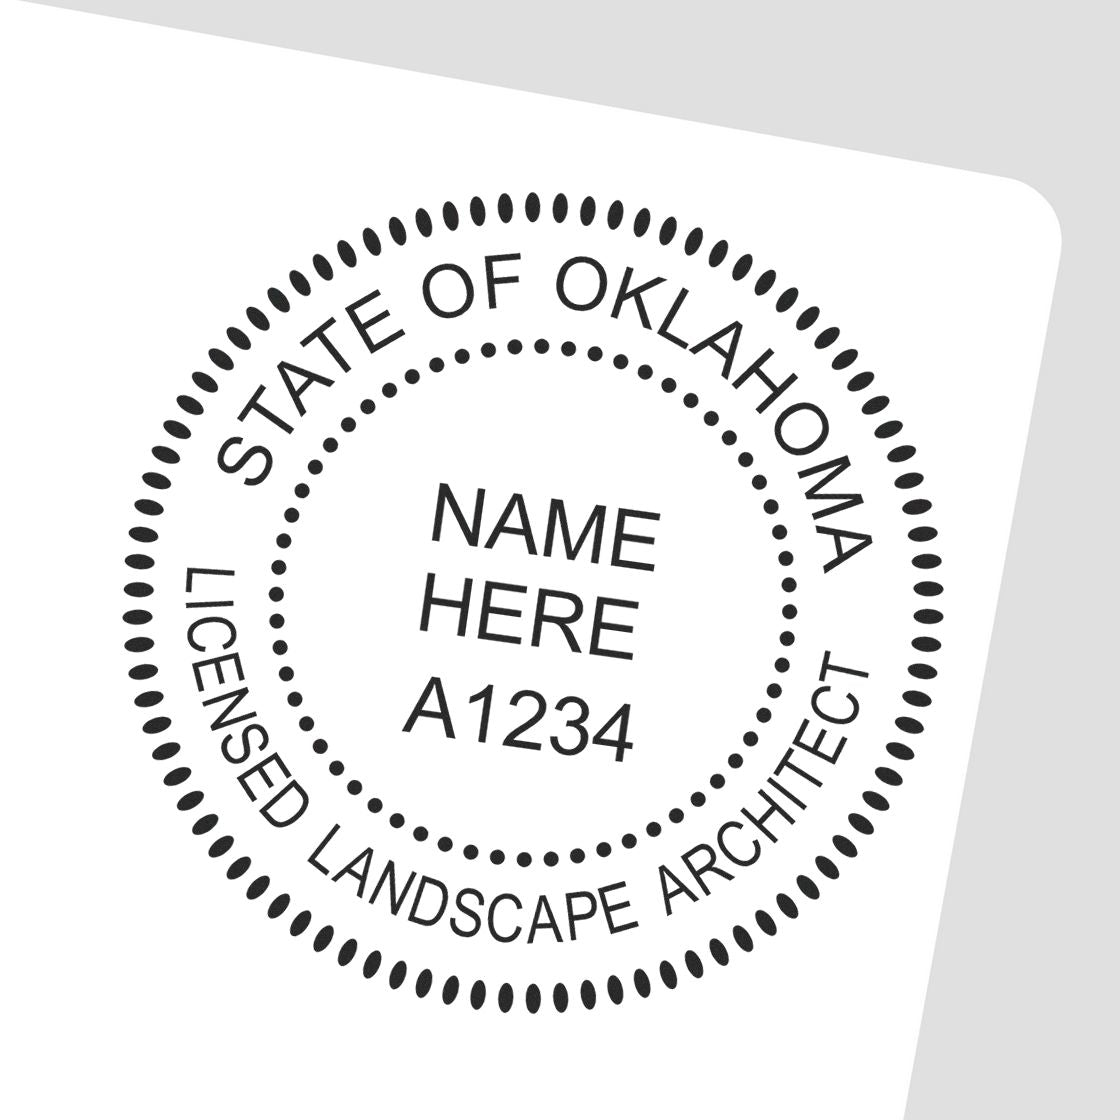 This paper is stamped with a sample imprint of the Oklahoma Landscape Architectural Seal Stamp, signifying its quality and reliability.